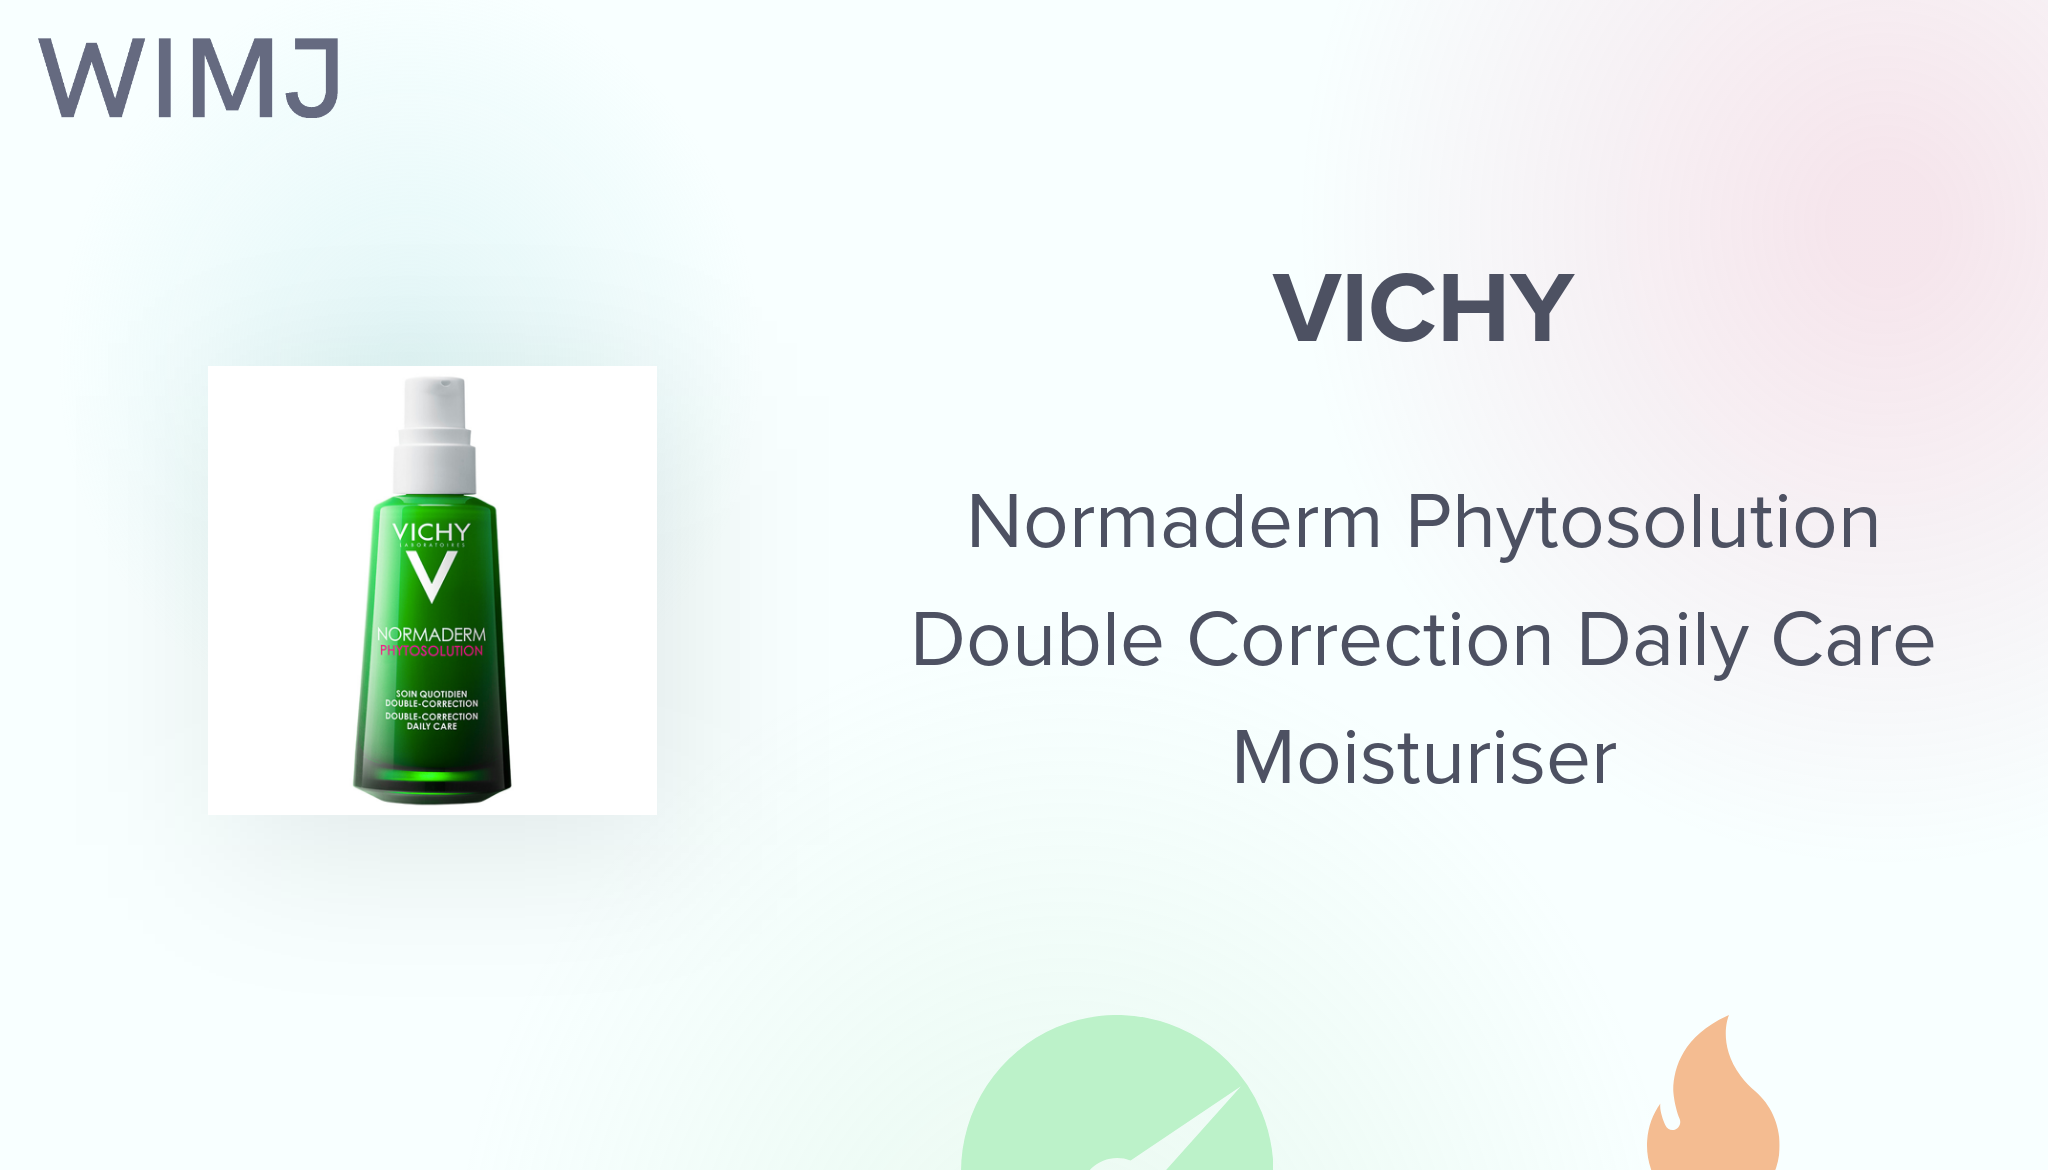 Review: Vichy - Normaderm Phytosolution Double Correction Daily Care Moisturiser